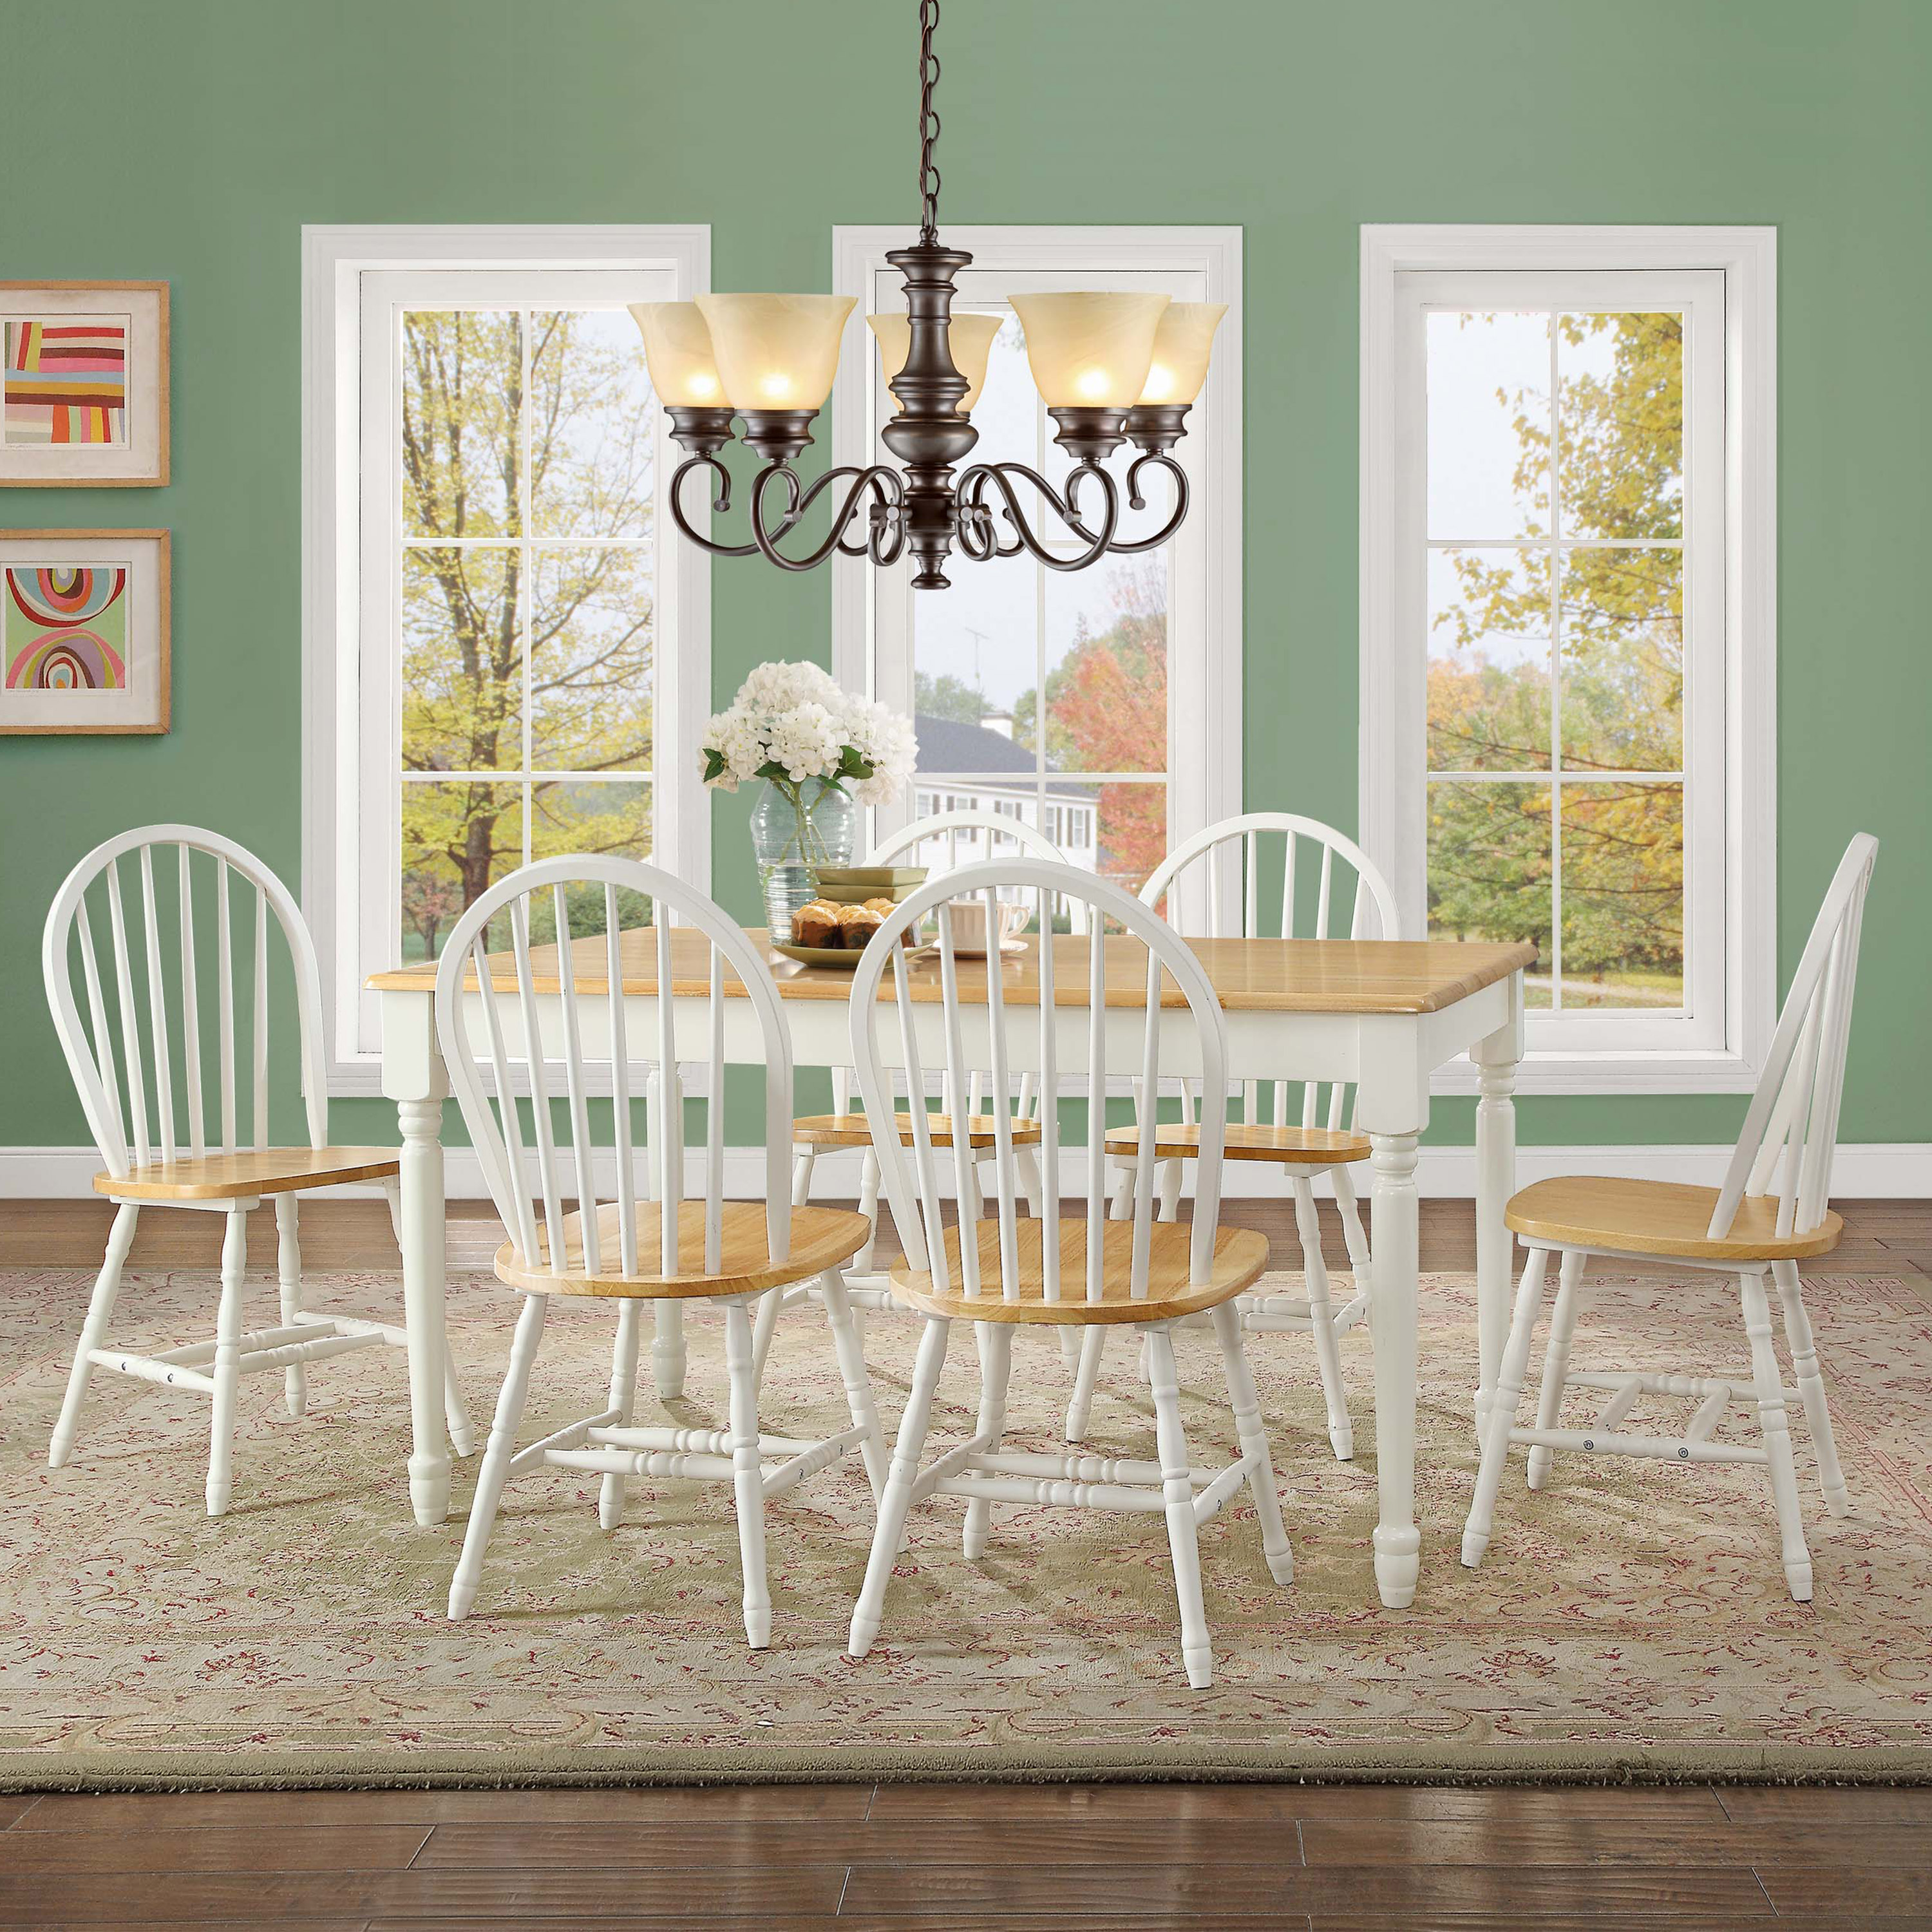 Better Homes and Gardens Autumn Lane Windsor Solid Wood Dining Chairs, White and Oak (Set of 2) - image 5 of 8